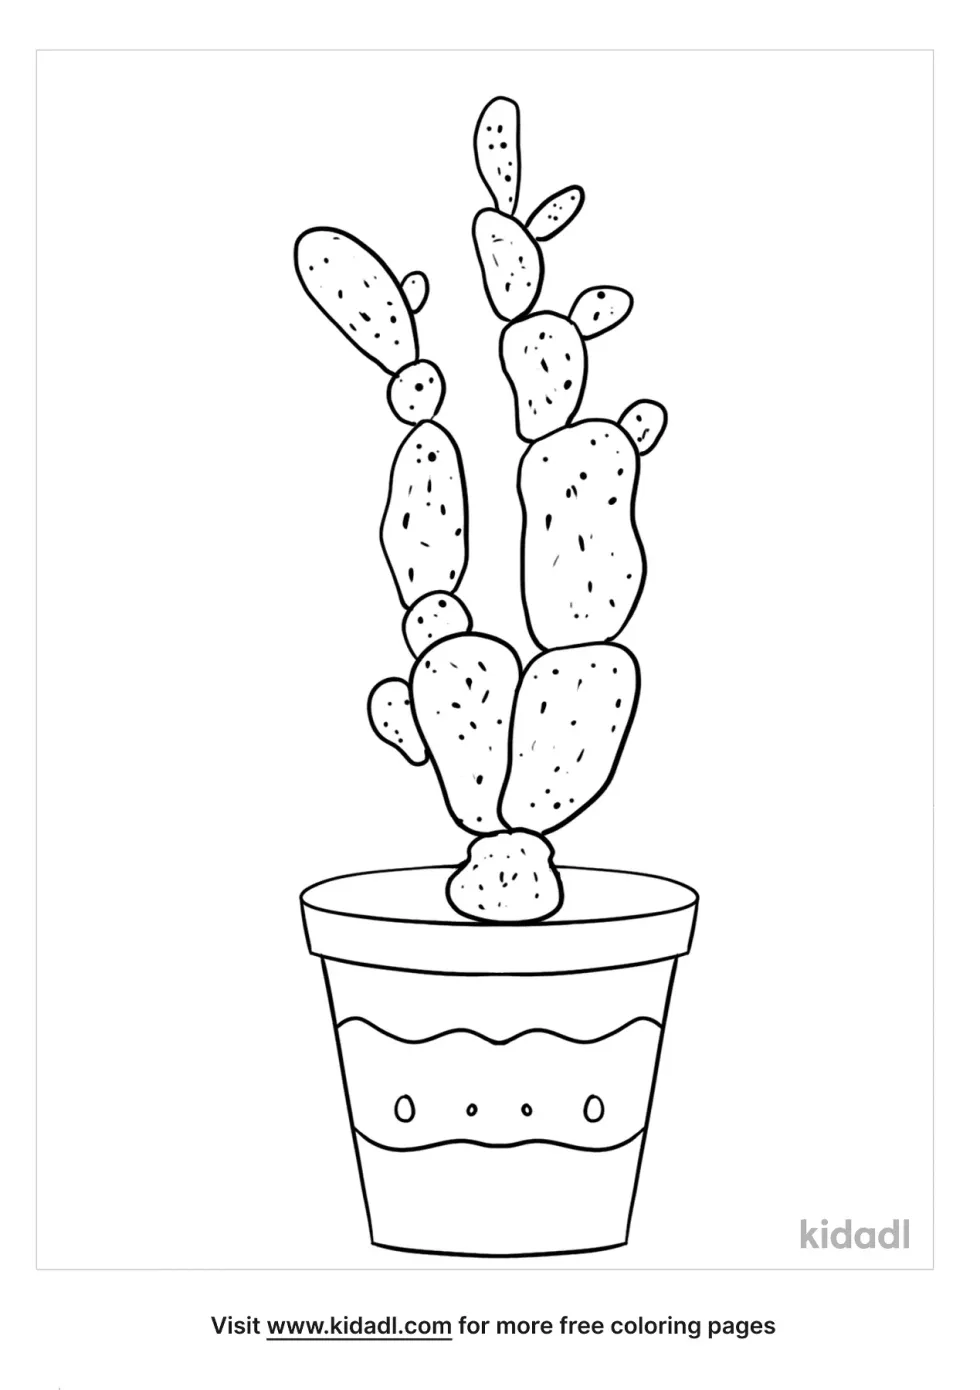 Lady Fingers Cactus Coloring Page